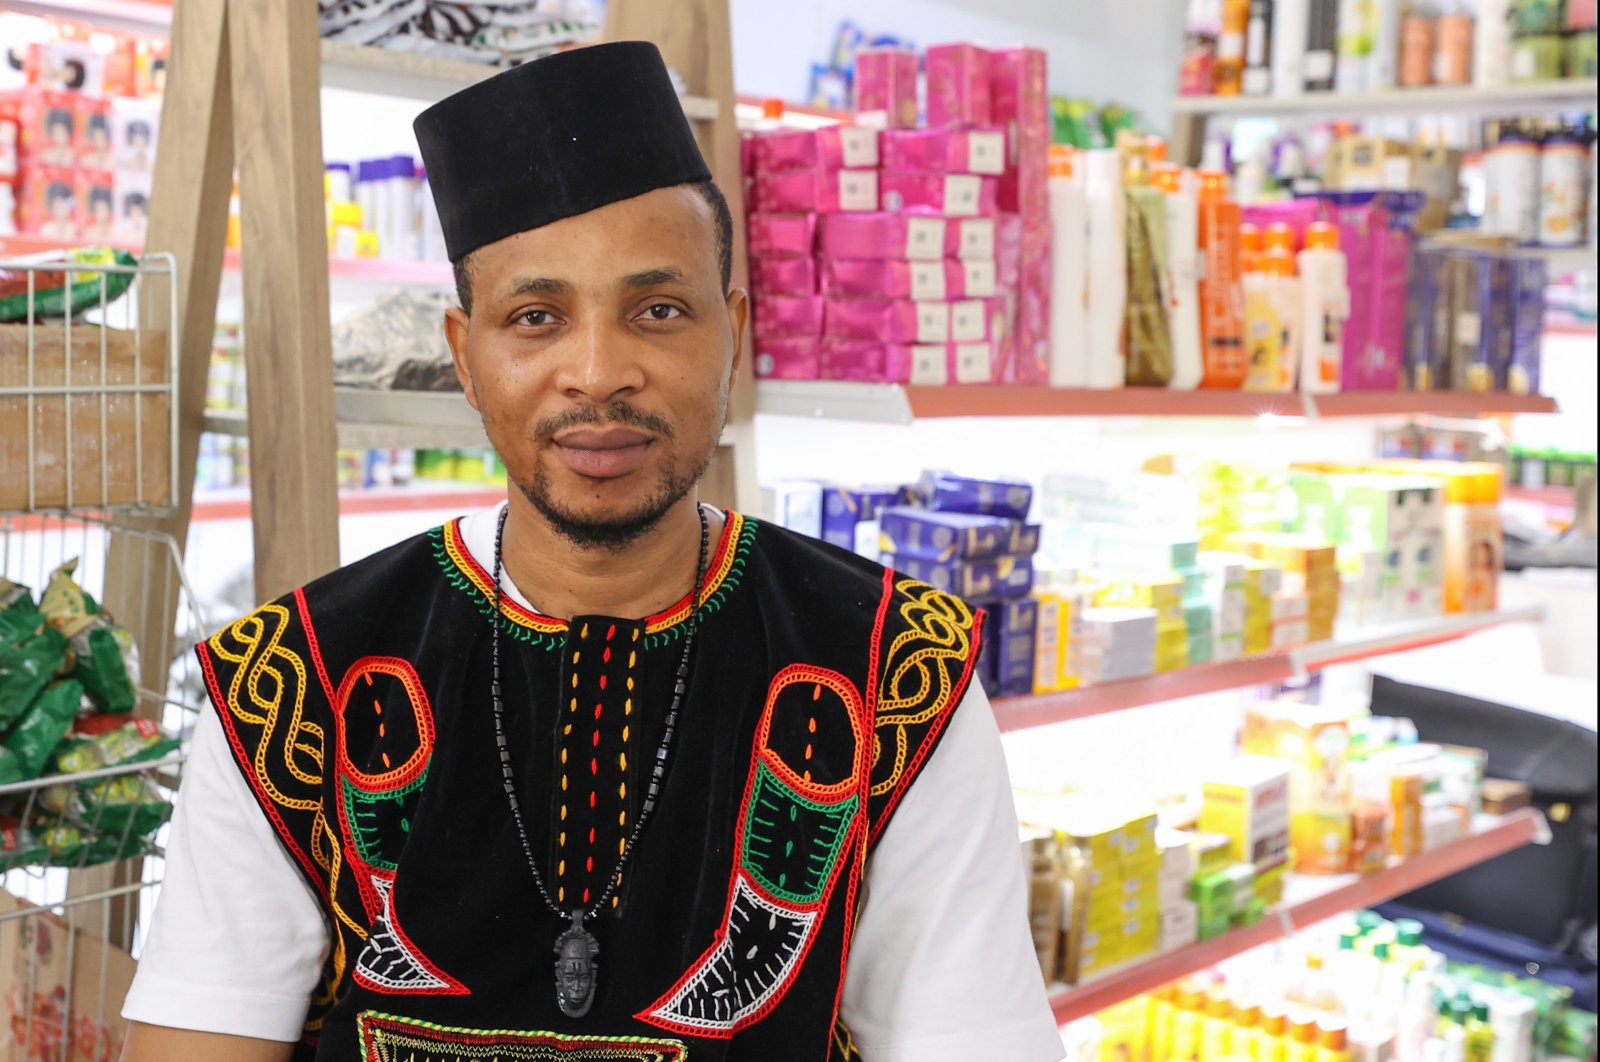 ‘Afrikan Son Durak’ store in Istanbul treat for homesick Africans